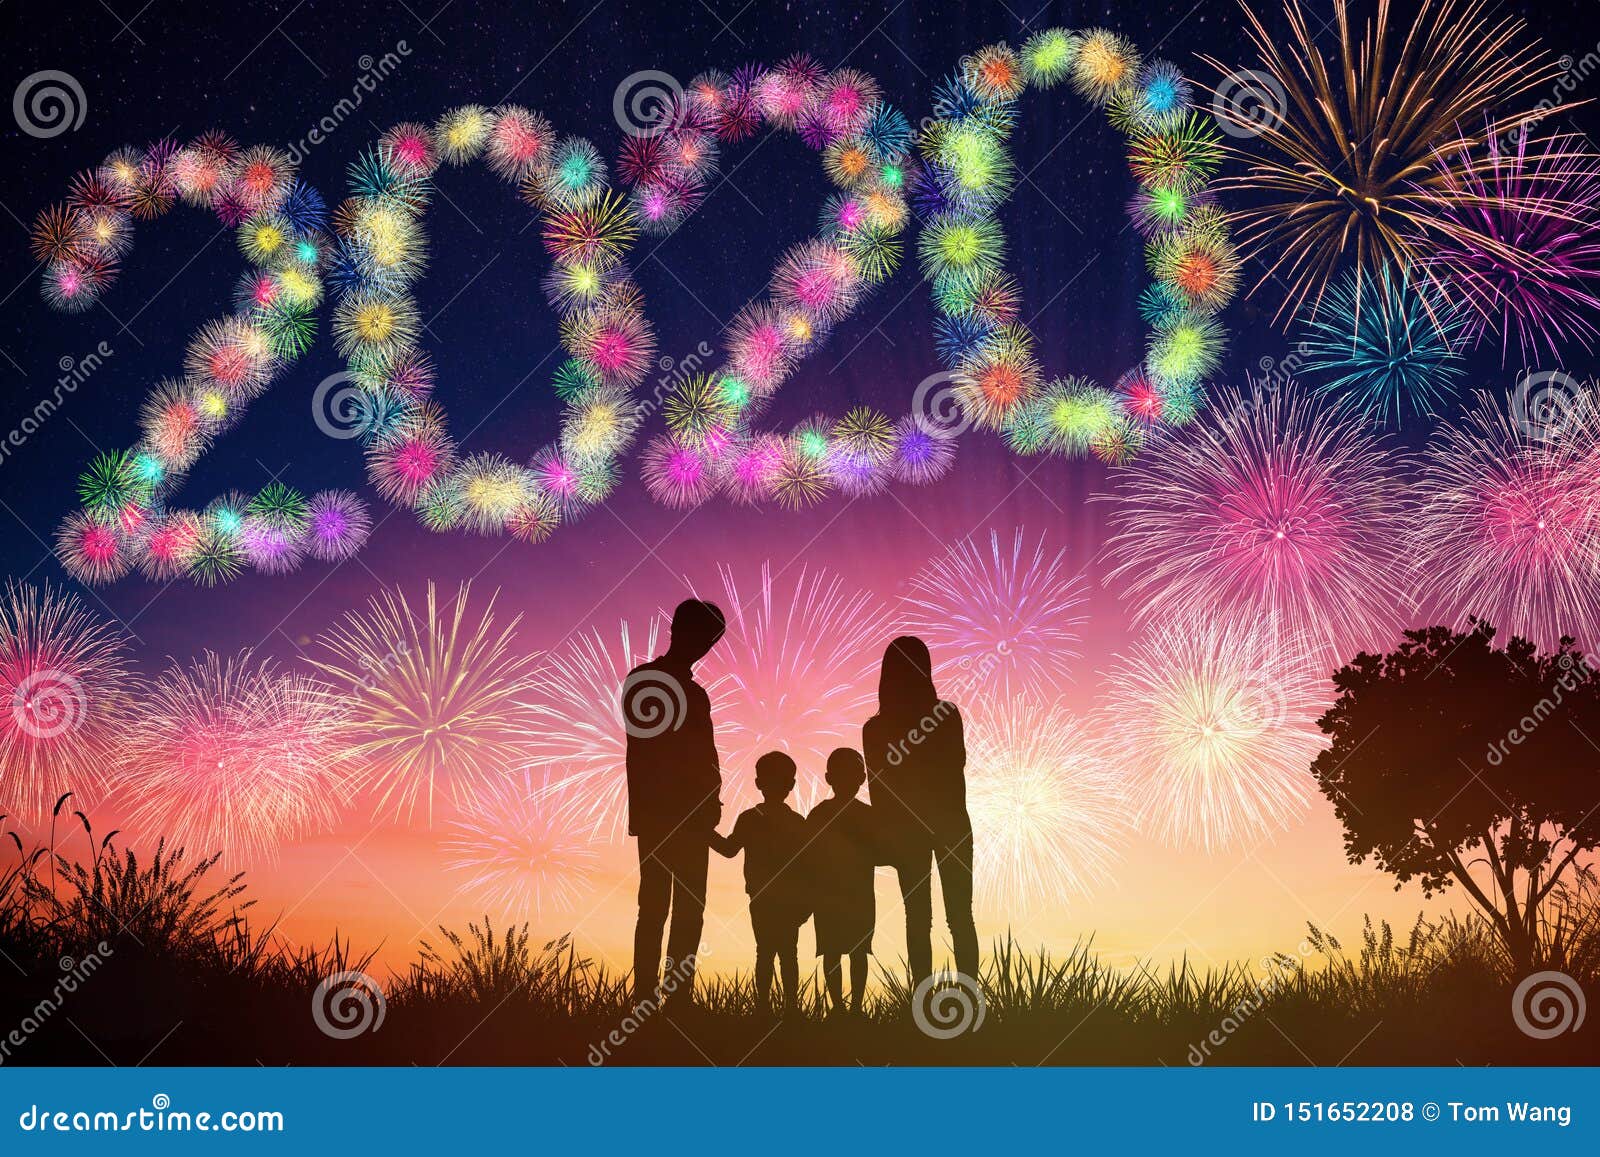 New Year 2020 Concepts. Family Watching Fireworks on Hill Stock ...